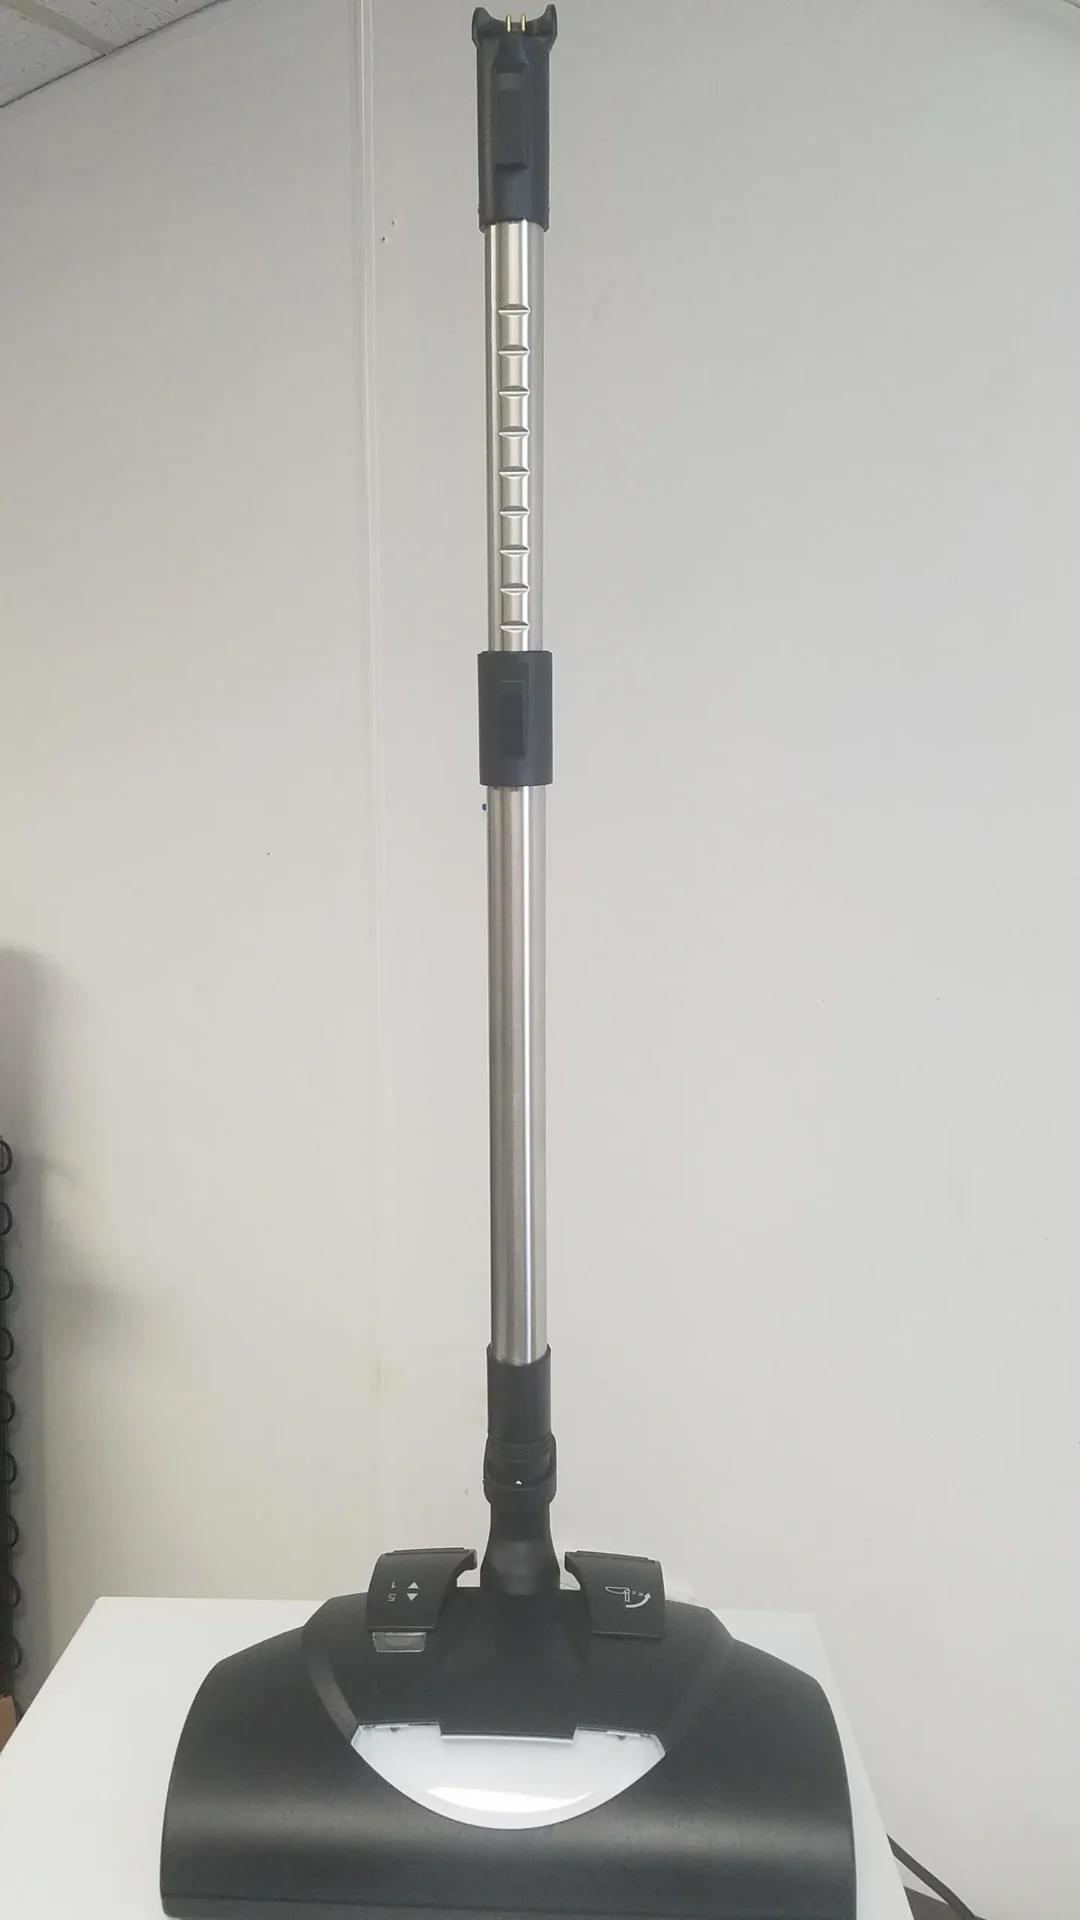 A pole with a black handle and a white background